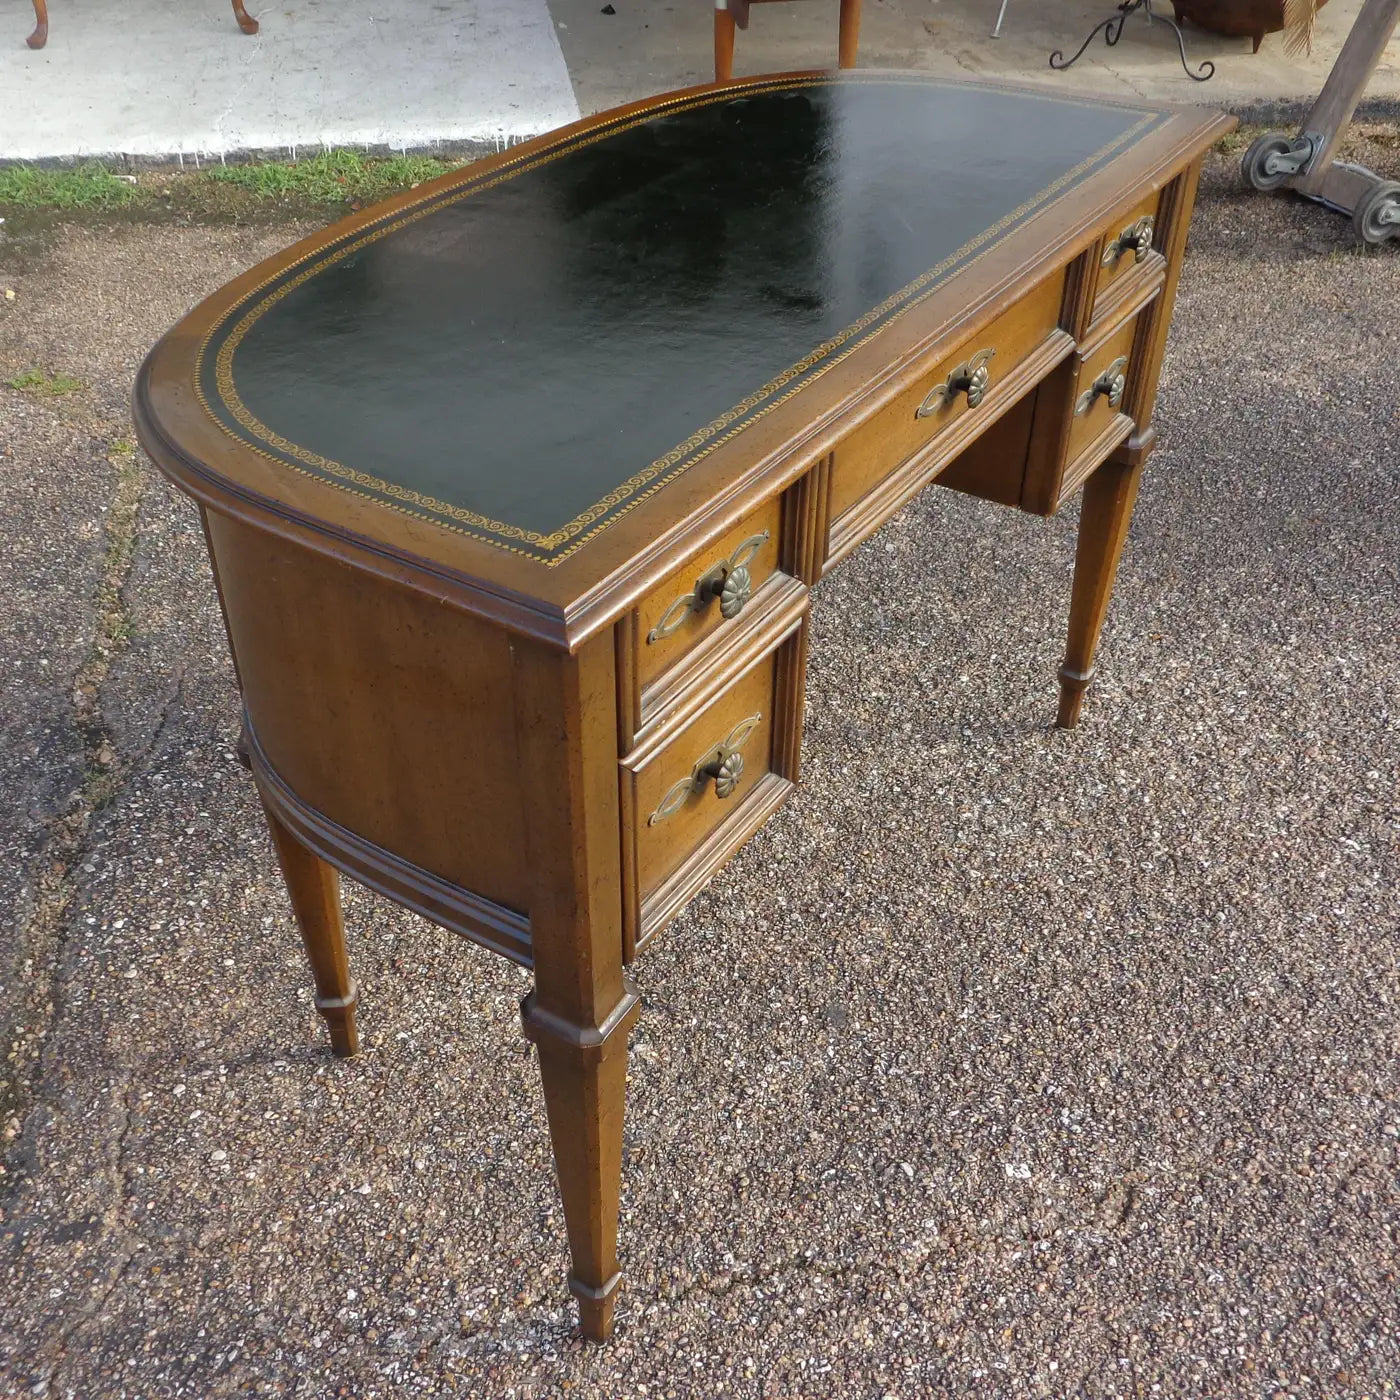 French Provencial Writing Desk by Sligh Furniture